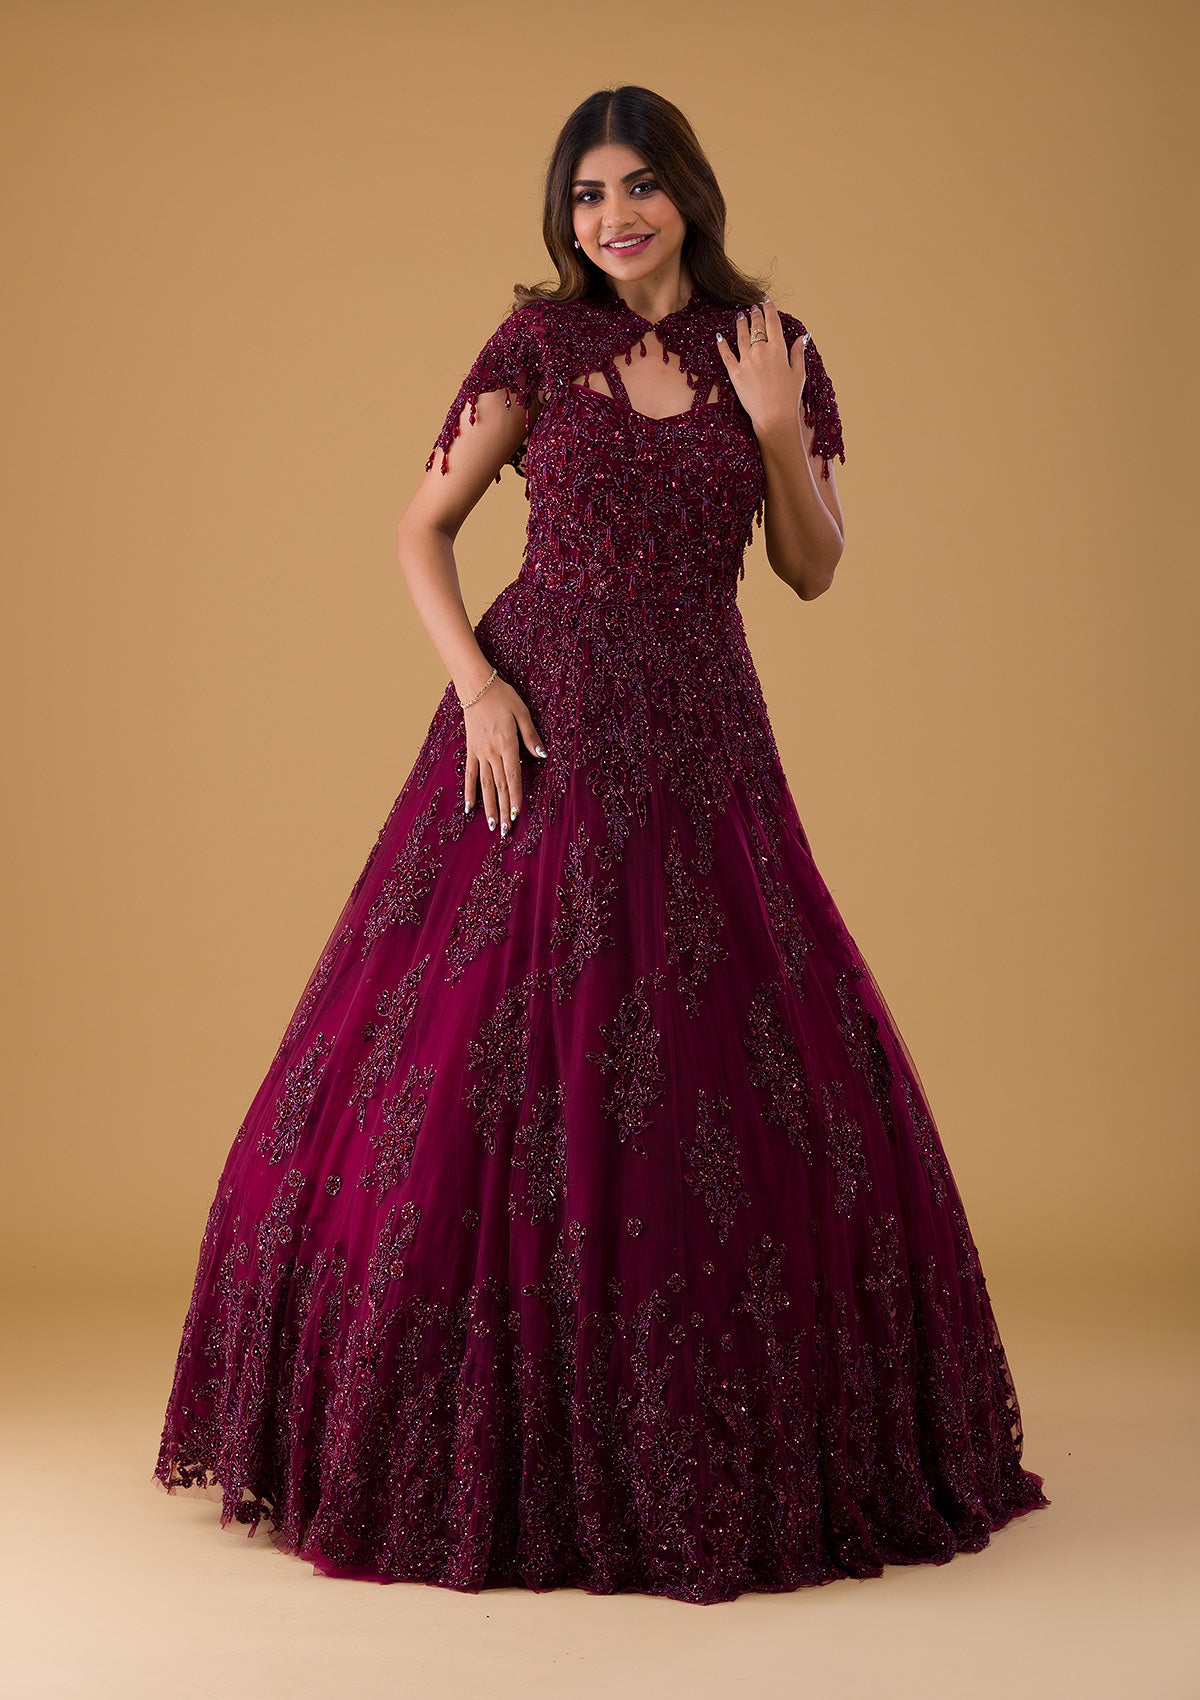 Mega Trail Gown Double Draped in Deep Wine color - Elated Wardrobe